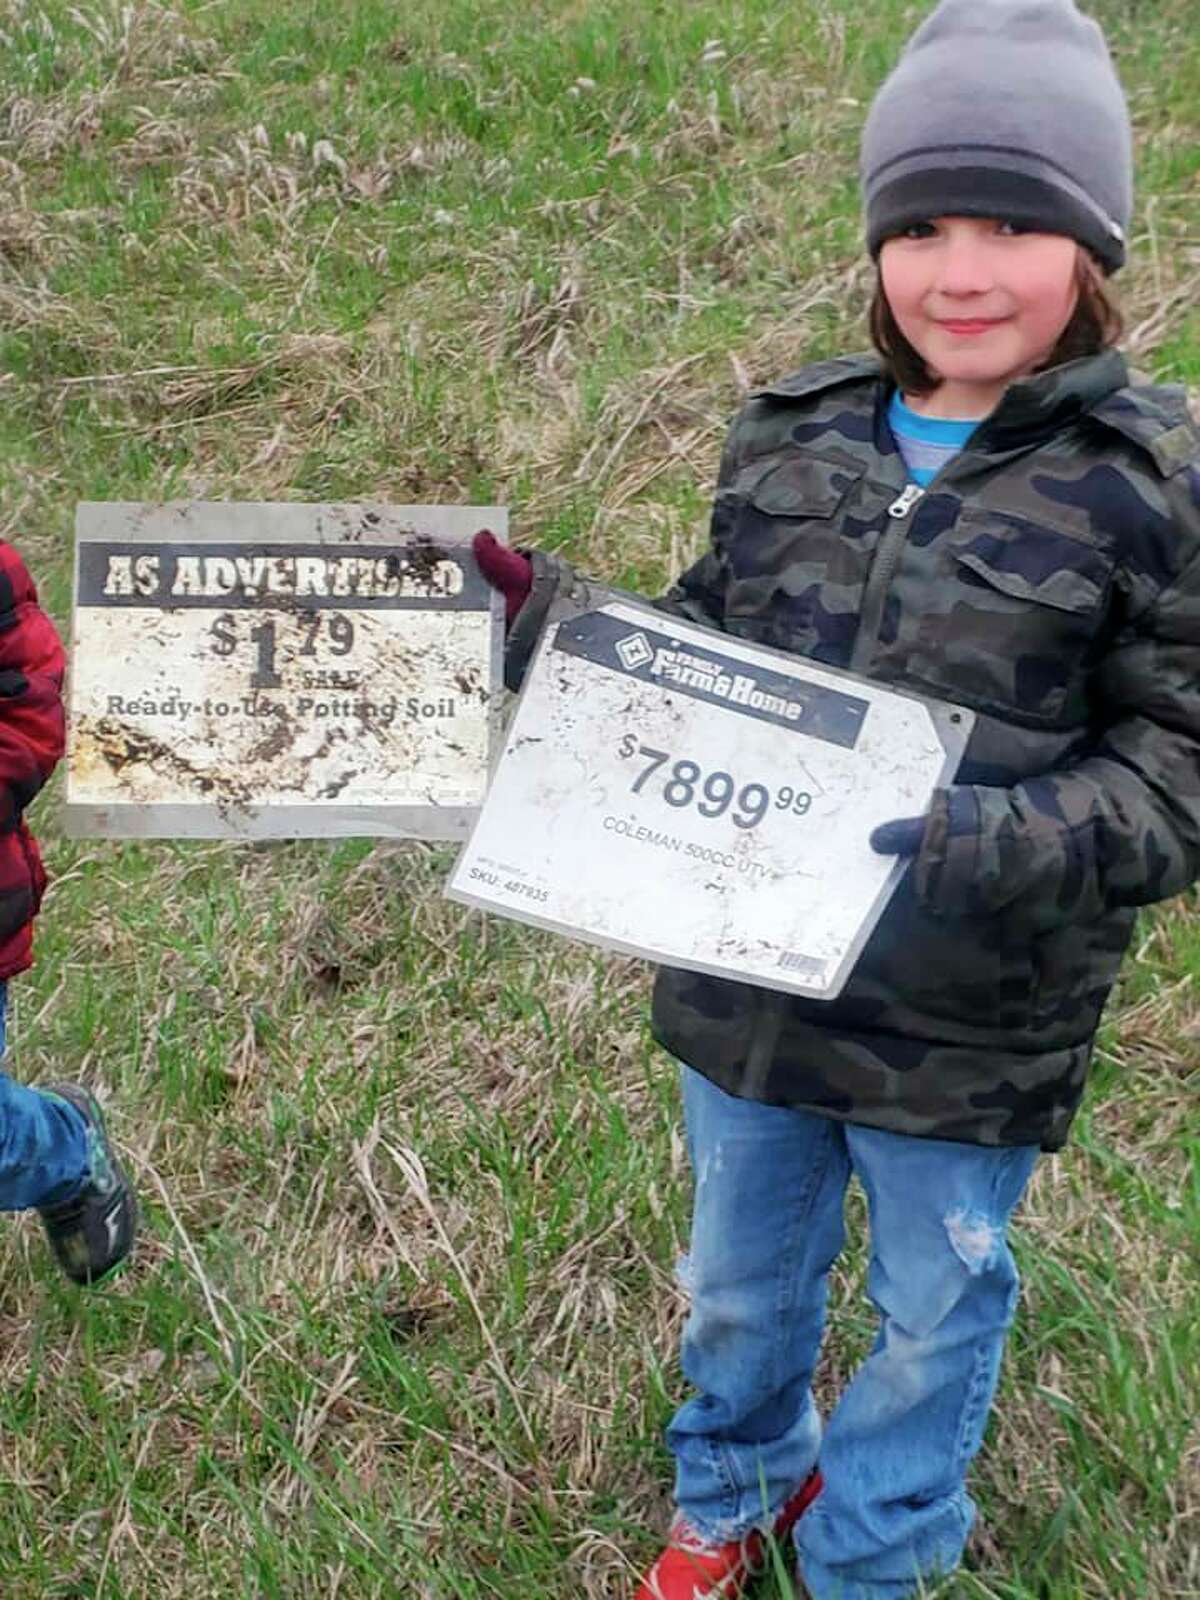 As a birthday present, seven year-old Addison Thorstenson, of Reed City, enlisted the help of her family for a recent trash pickup. (Courtesy photo)